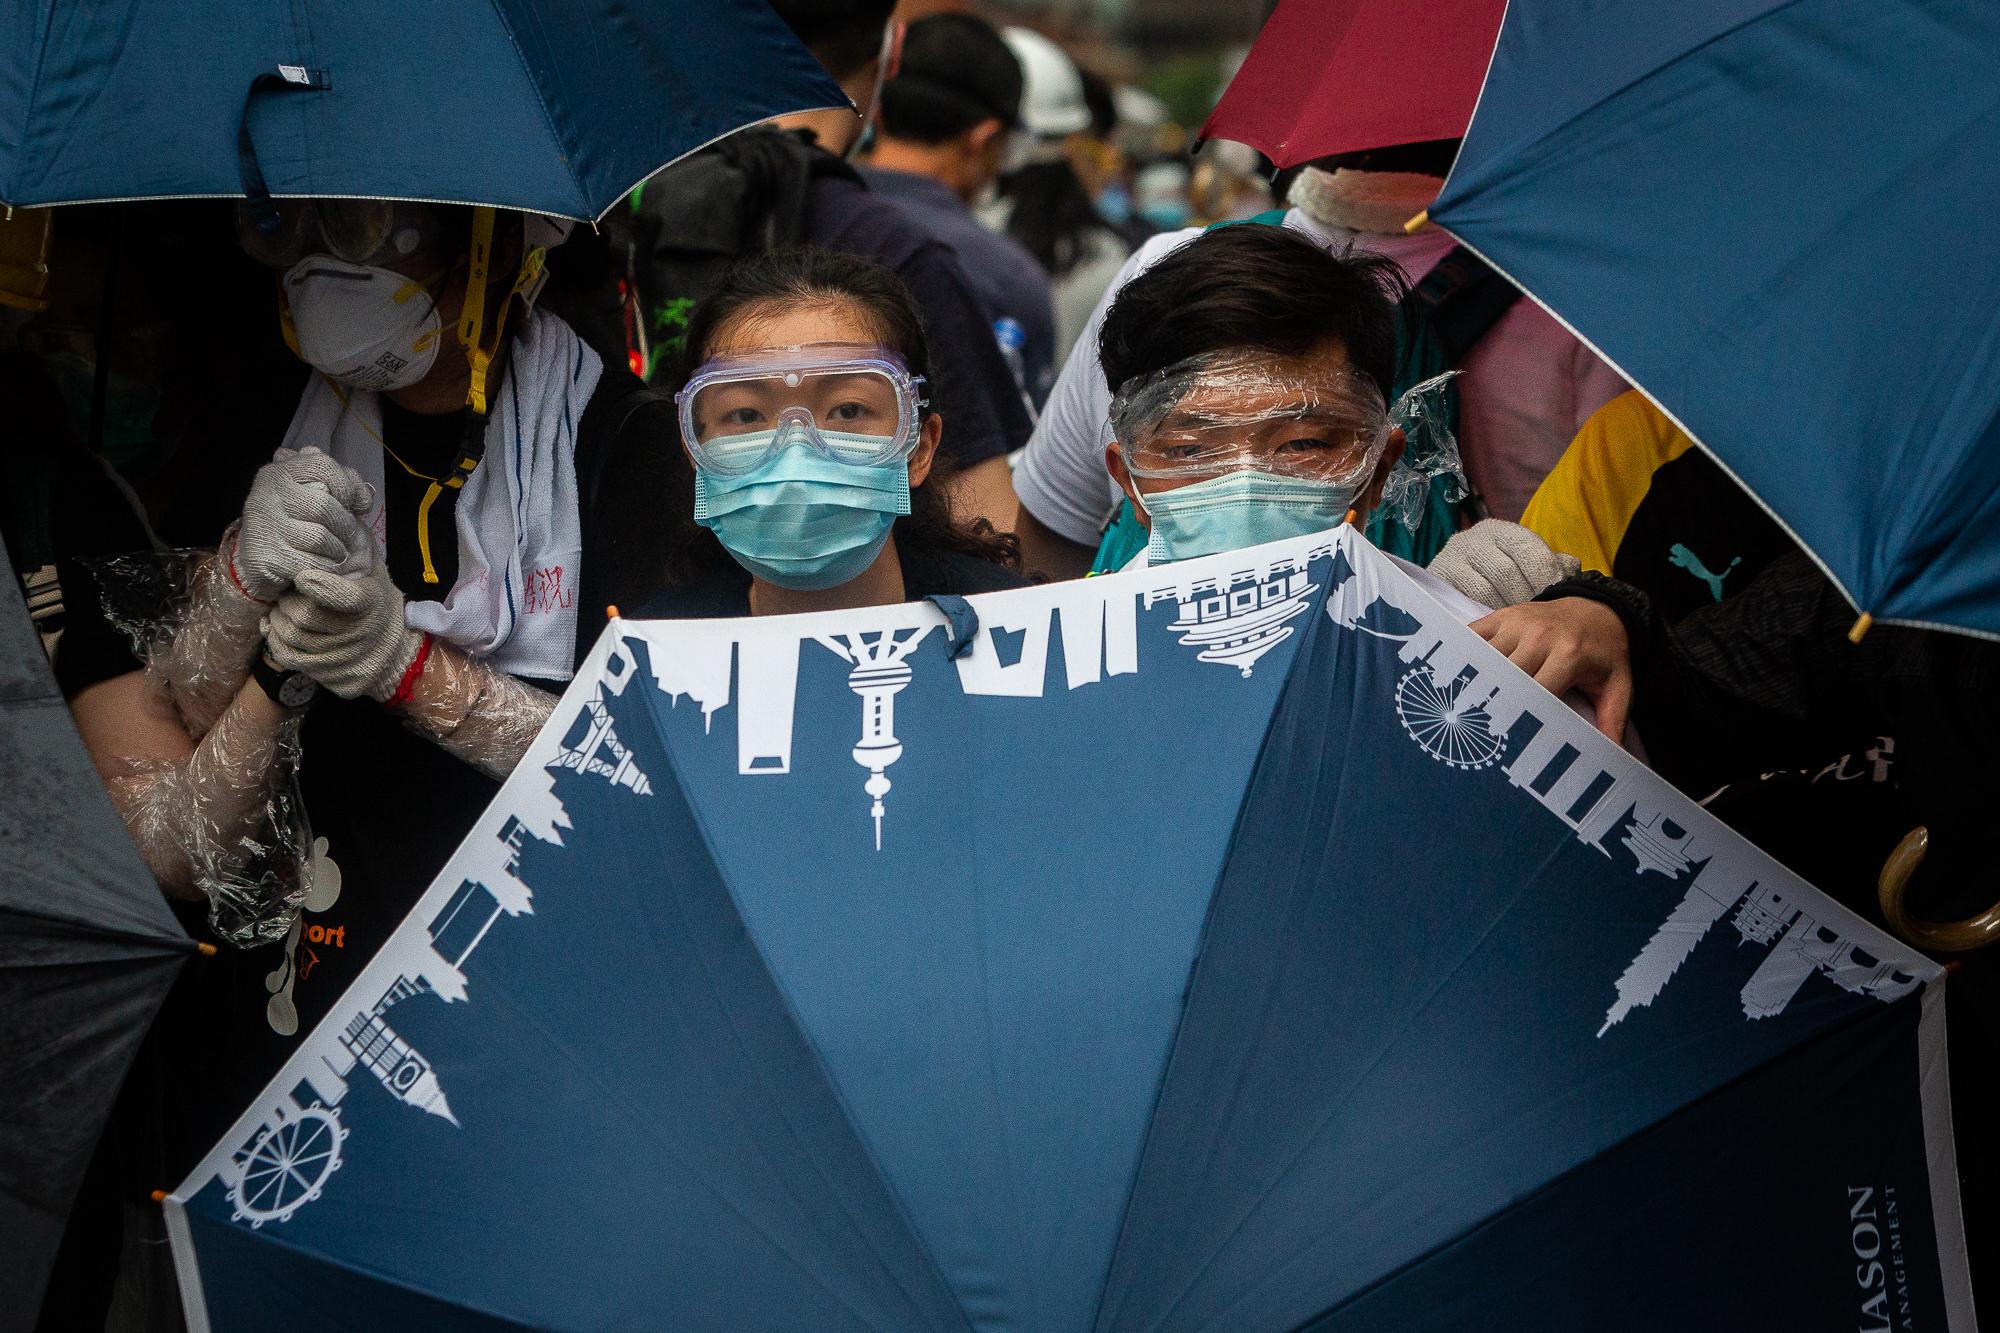 Demonstrators protect themselves behind an umbrella during a protest against a proposed extradition law in Hong Kong.